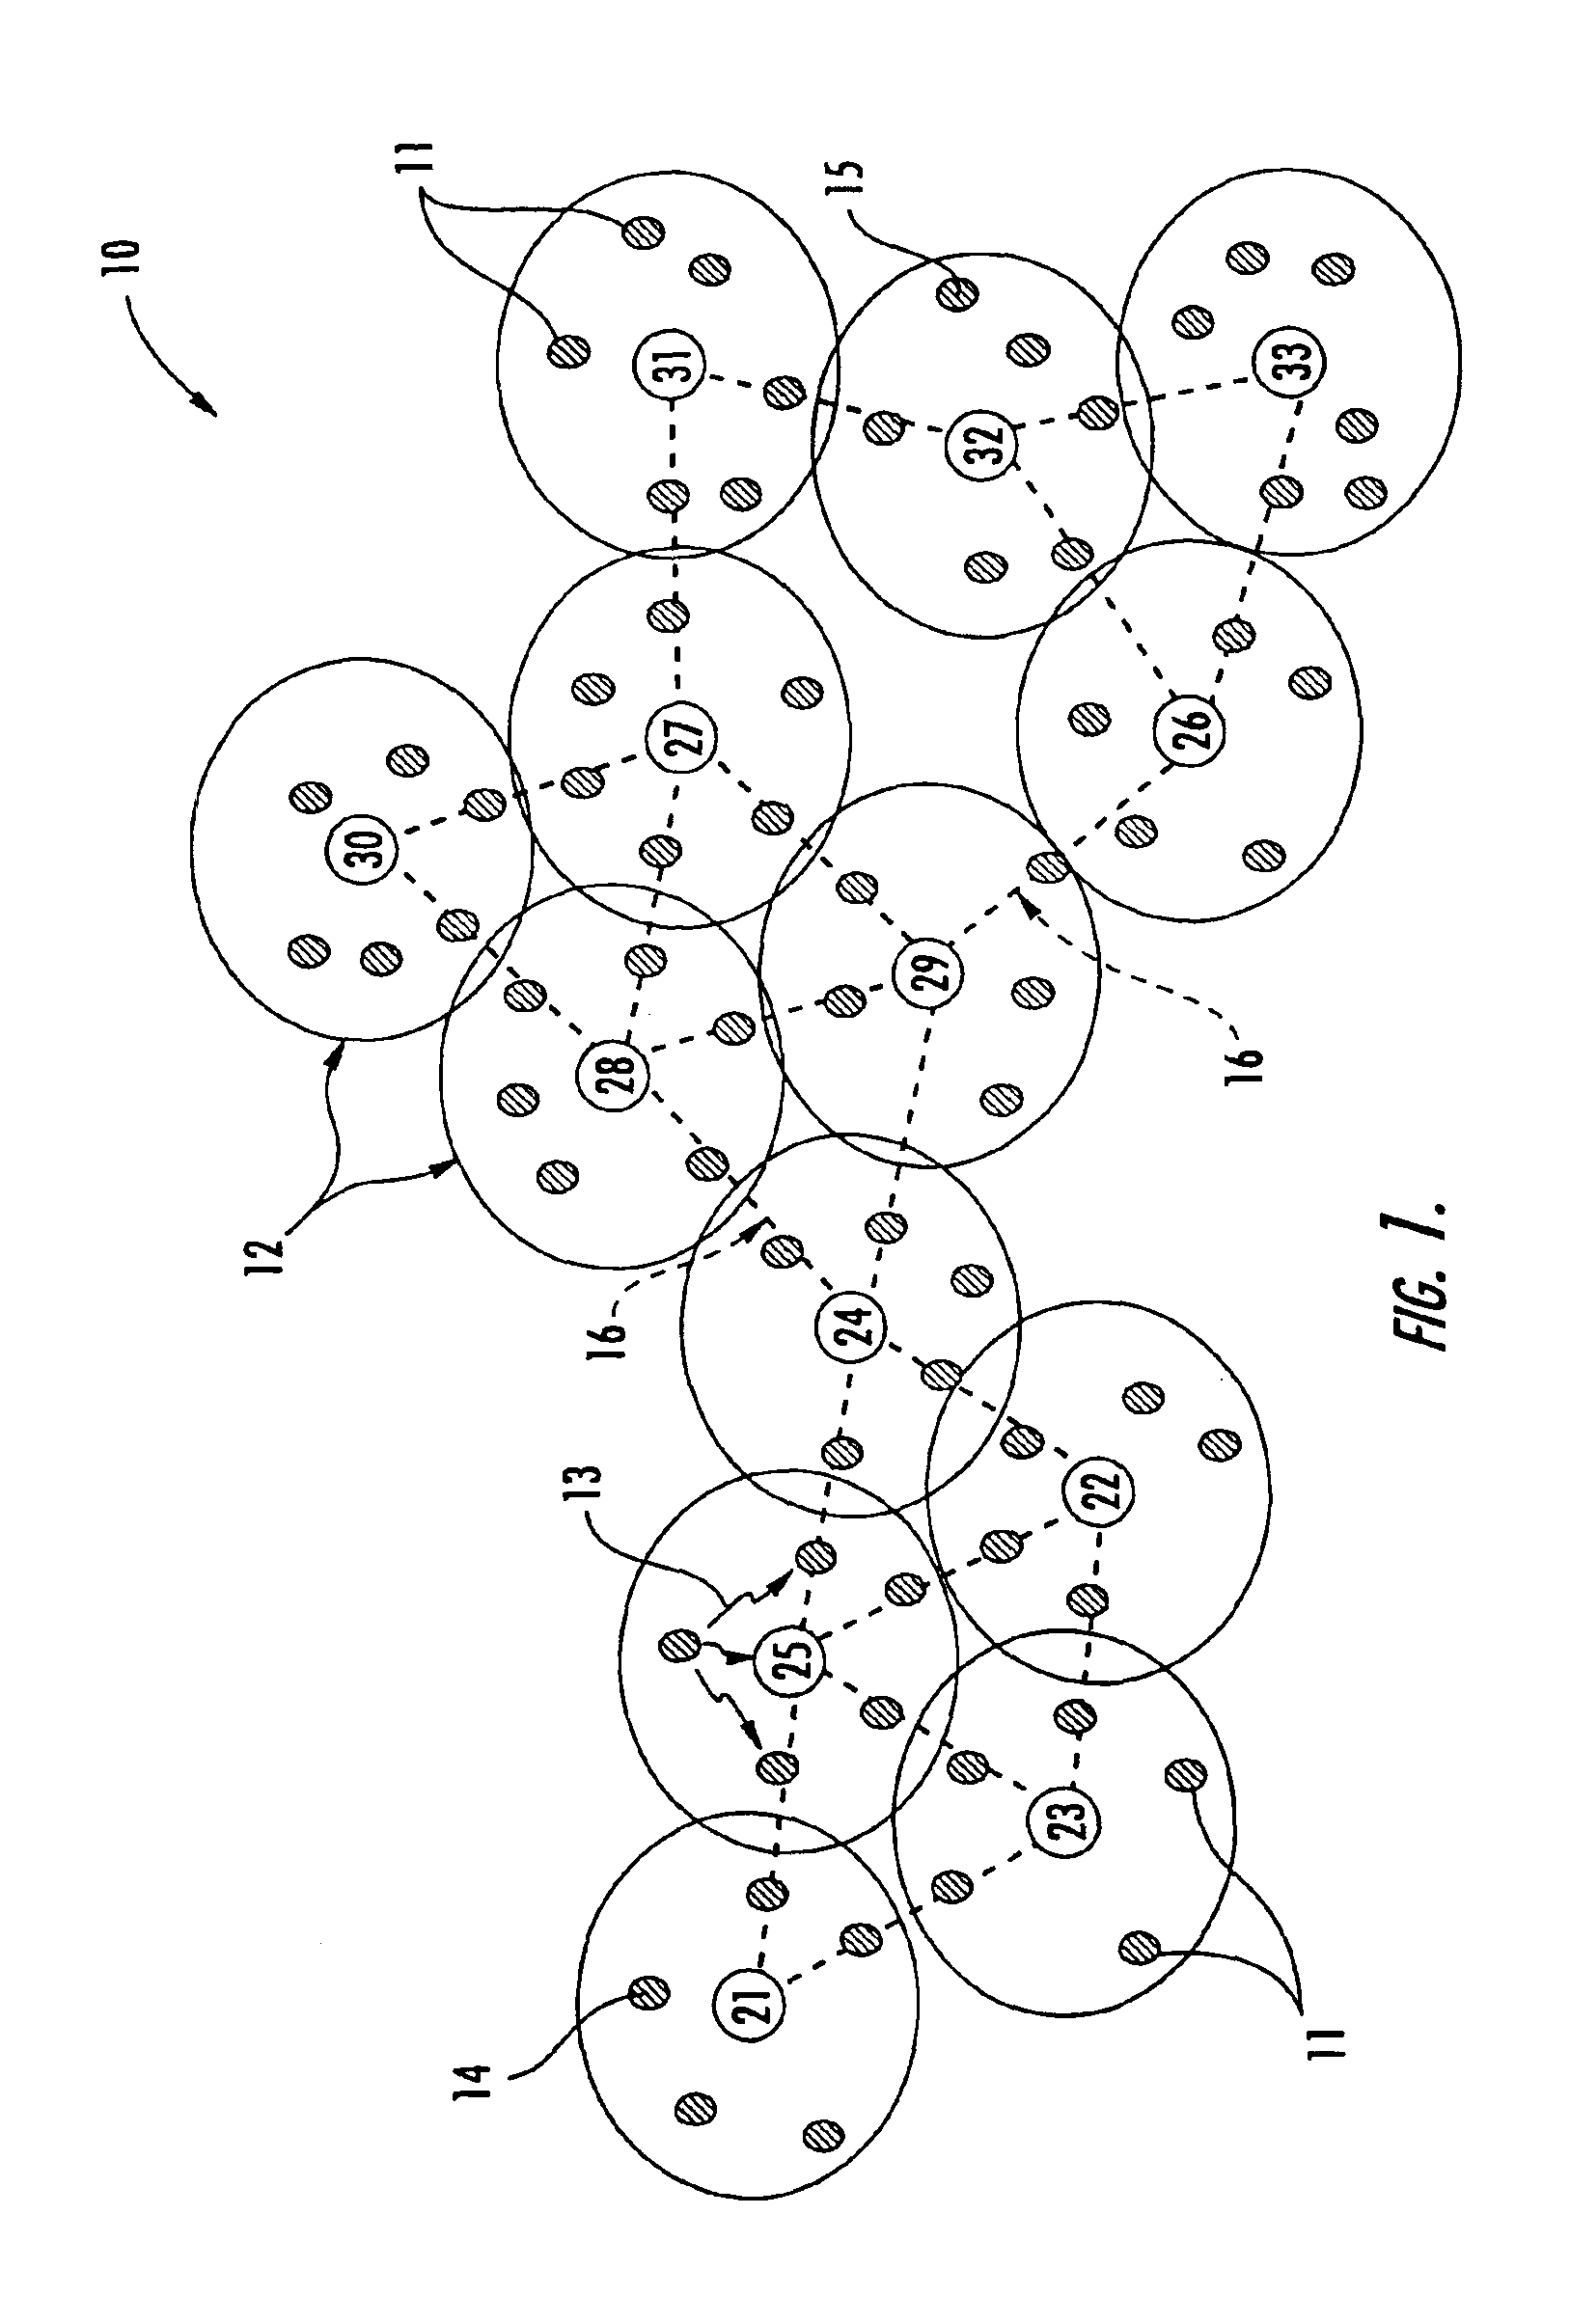 Hierarchical mobile ad-hoc network and methods for performing reactive routing therein using dynamic source routing (DSR)